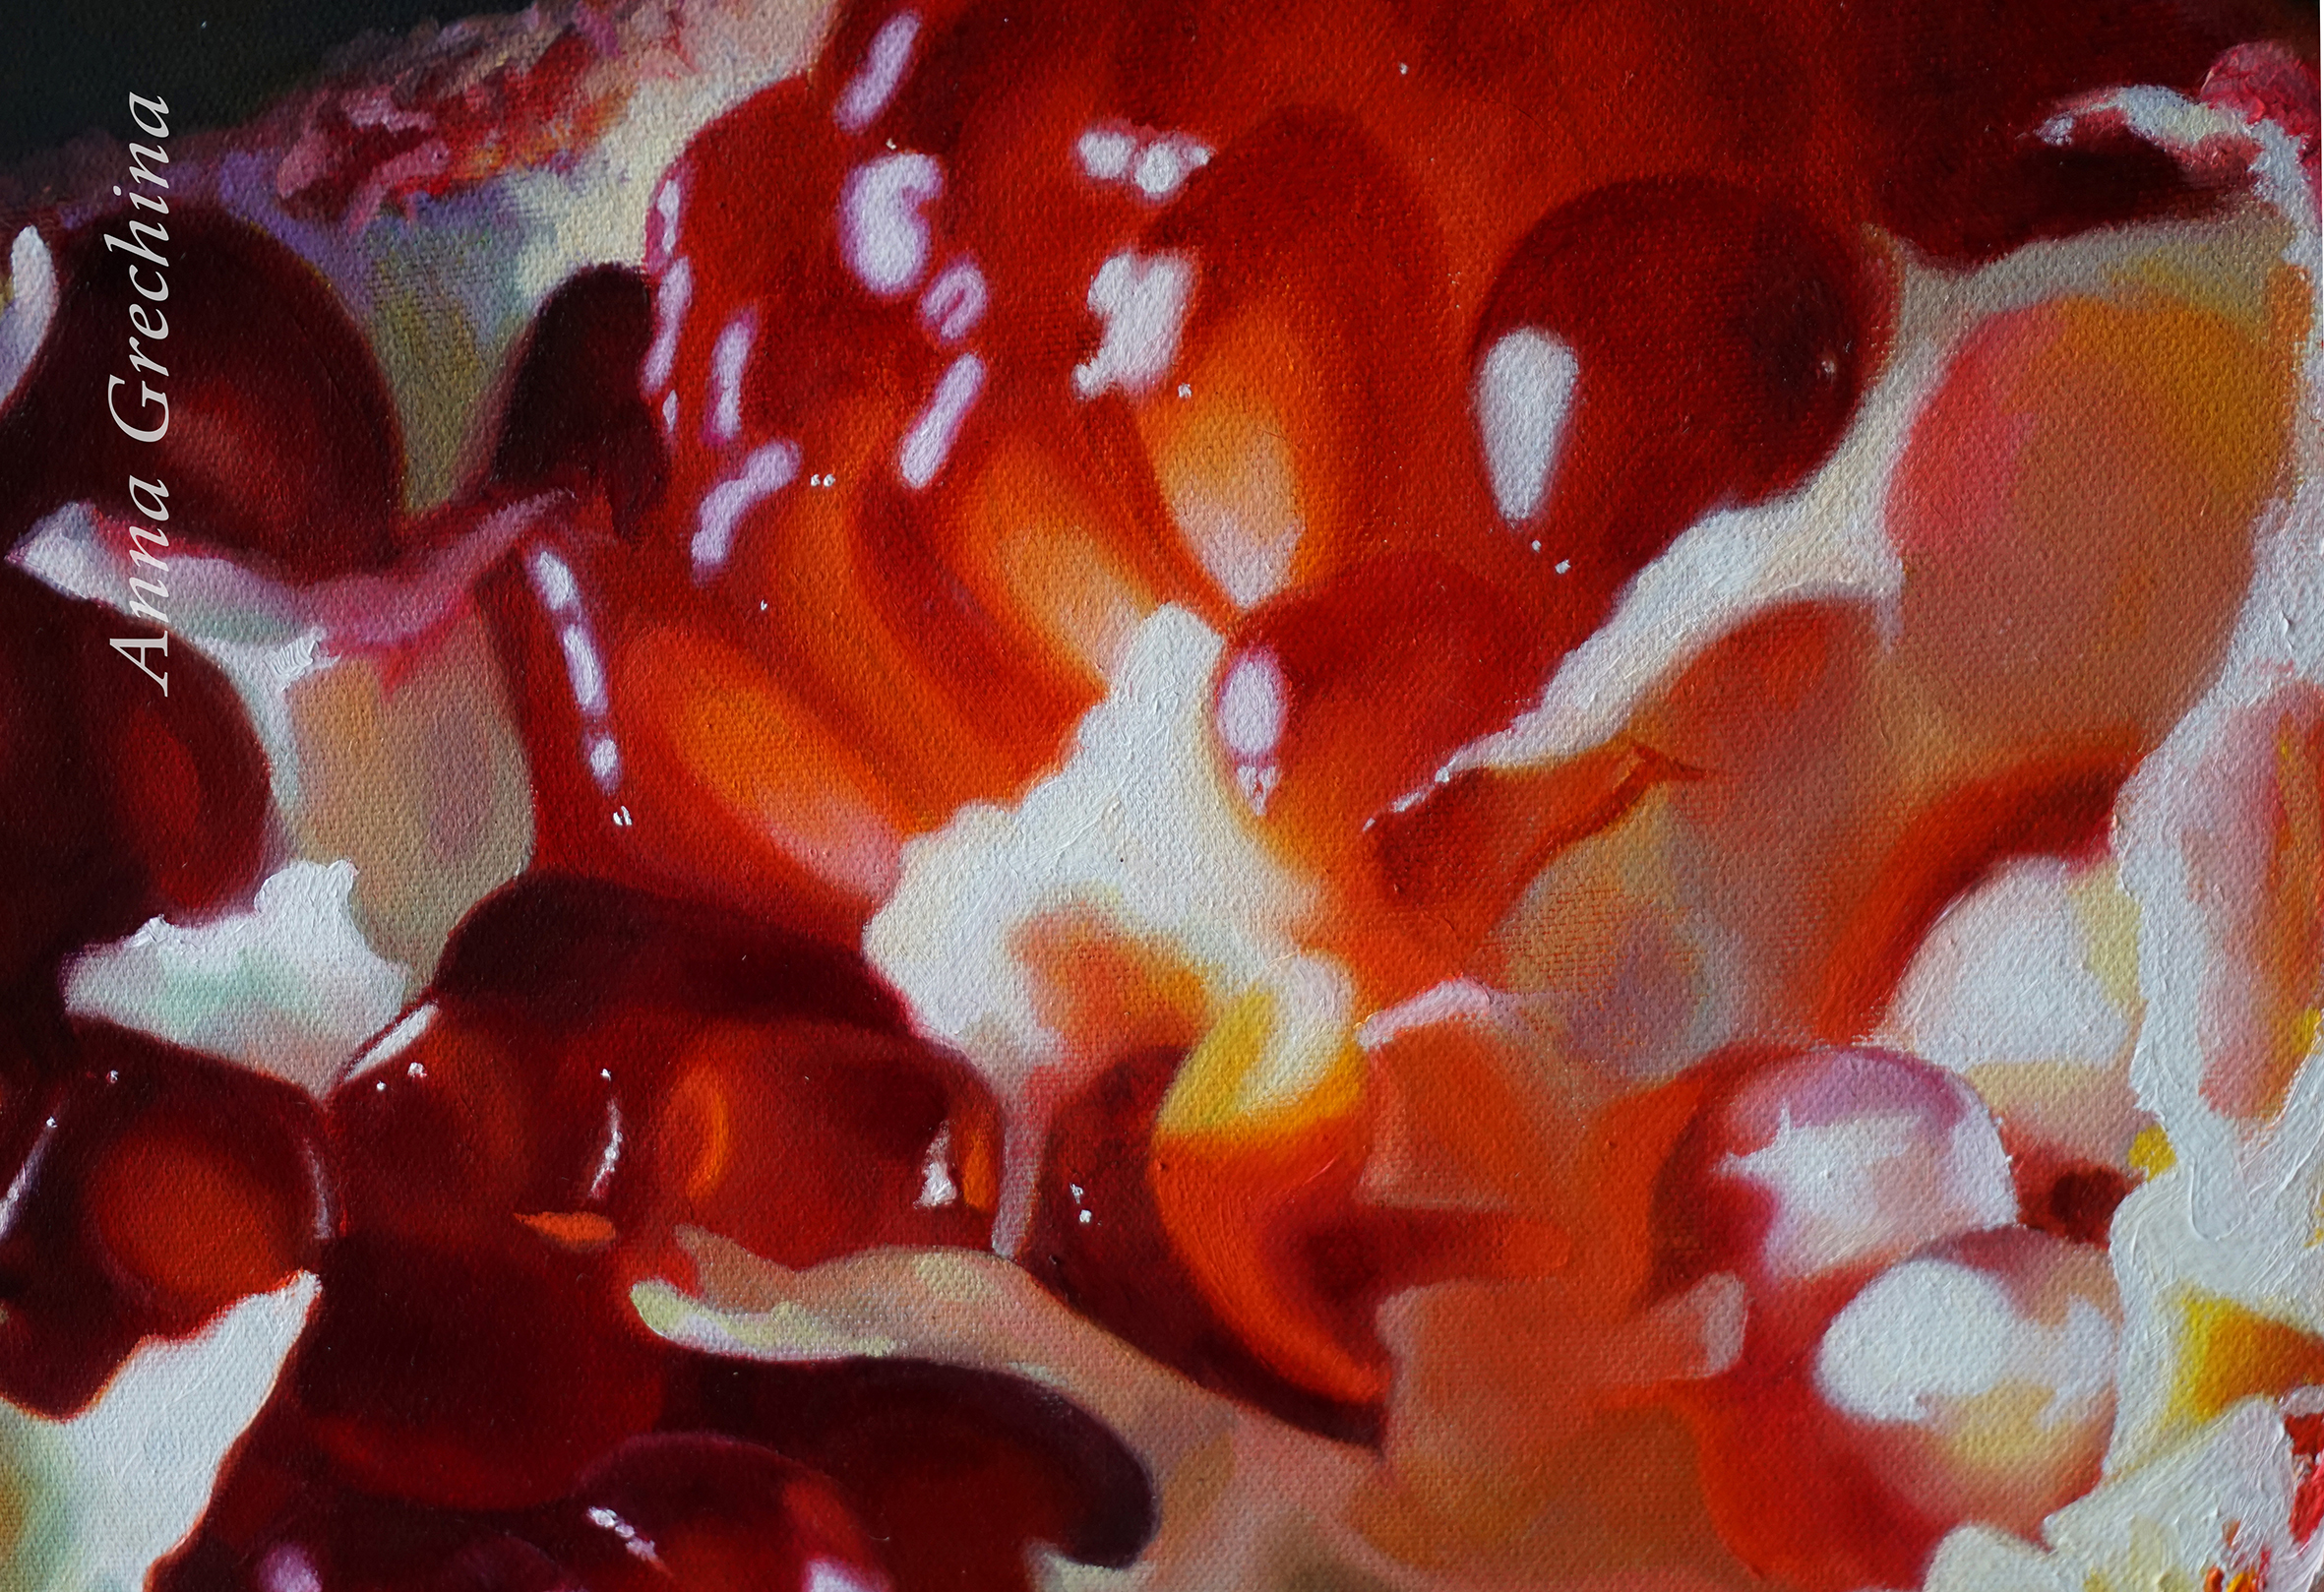 Grechina Anna paintings, painting. hyperrealism. Still life with pomegranate.